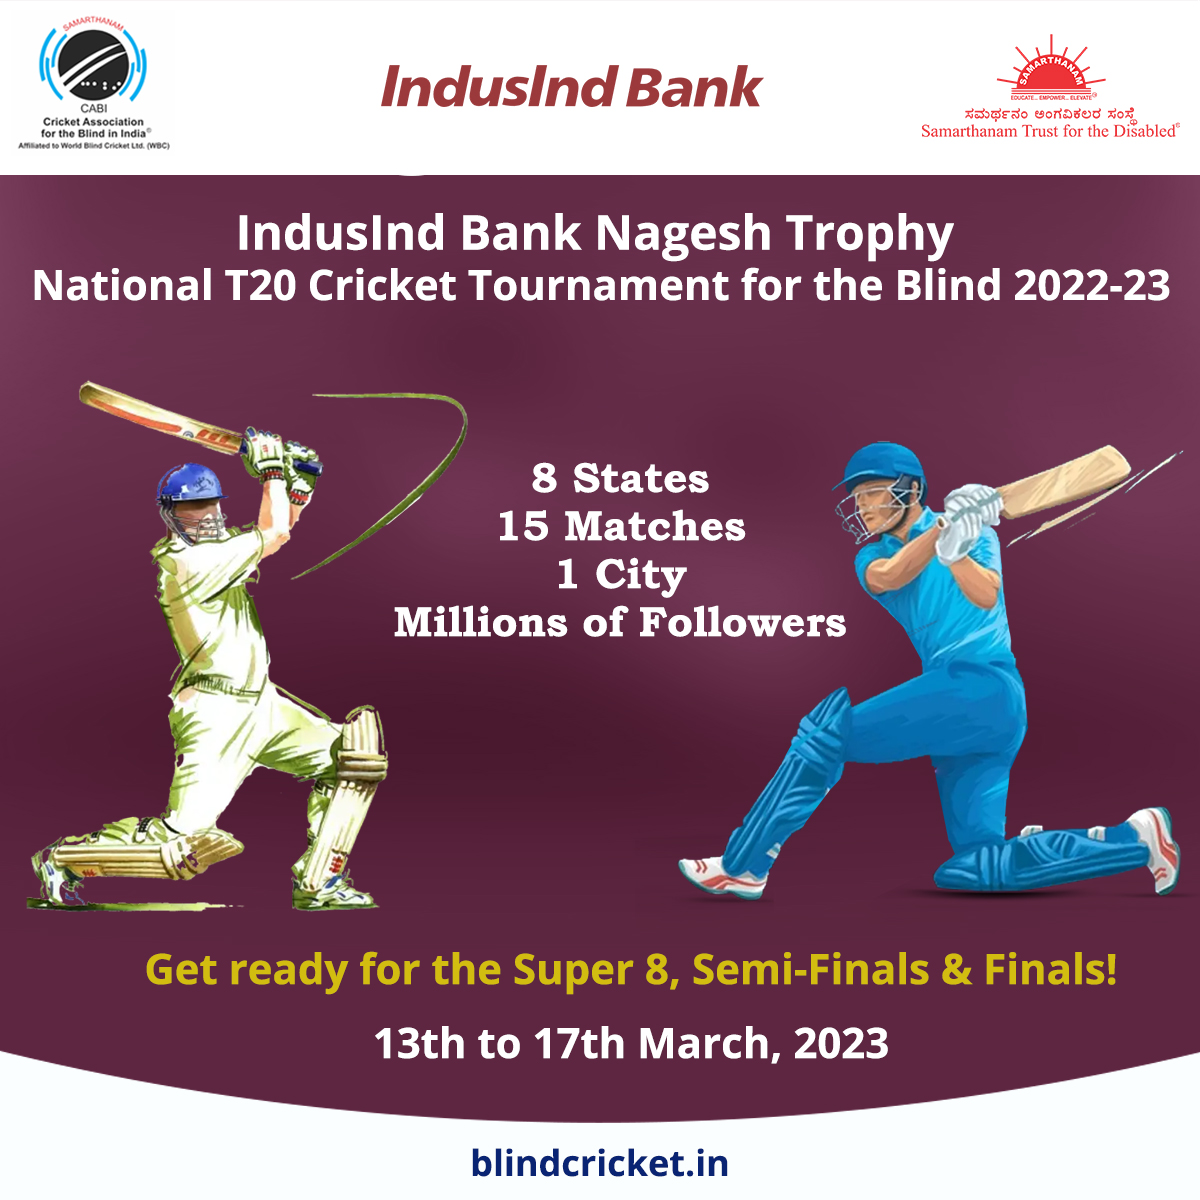 Super 8, Semi-Finals, and Finals of the IndusInd Bank Nagesh Trophy National T20 Cricket Tournament for the Blind 2022-23!